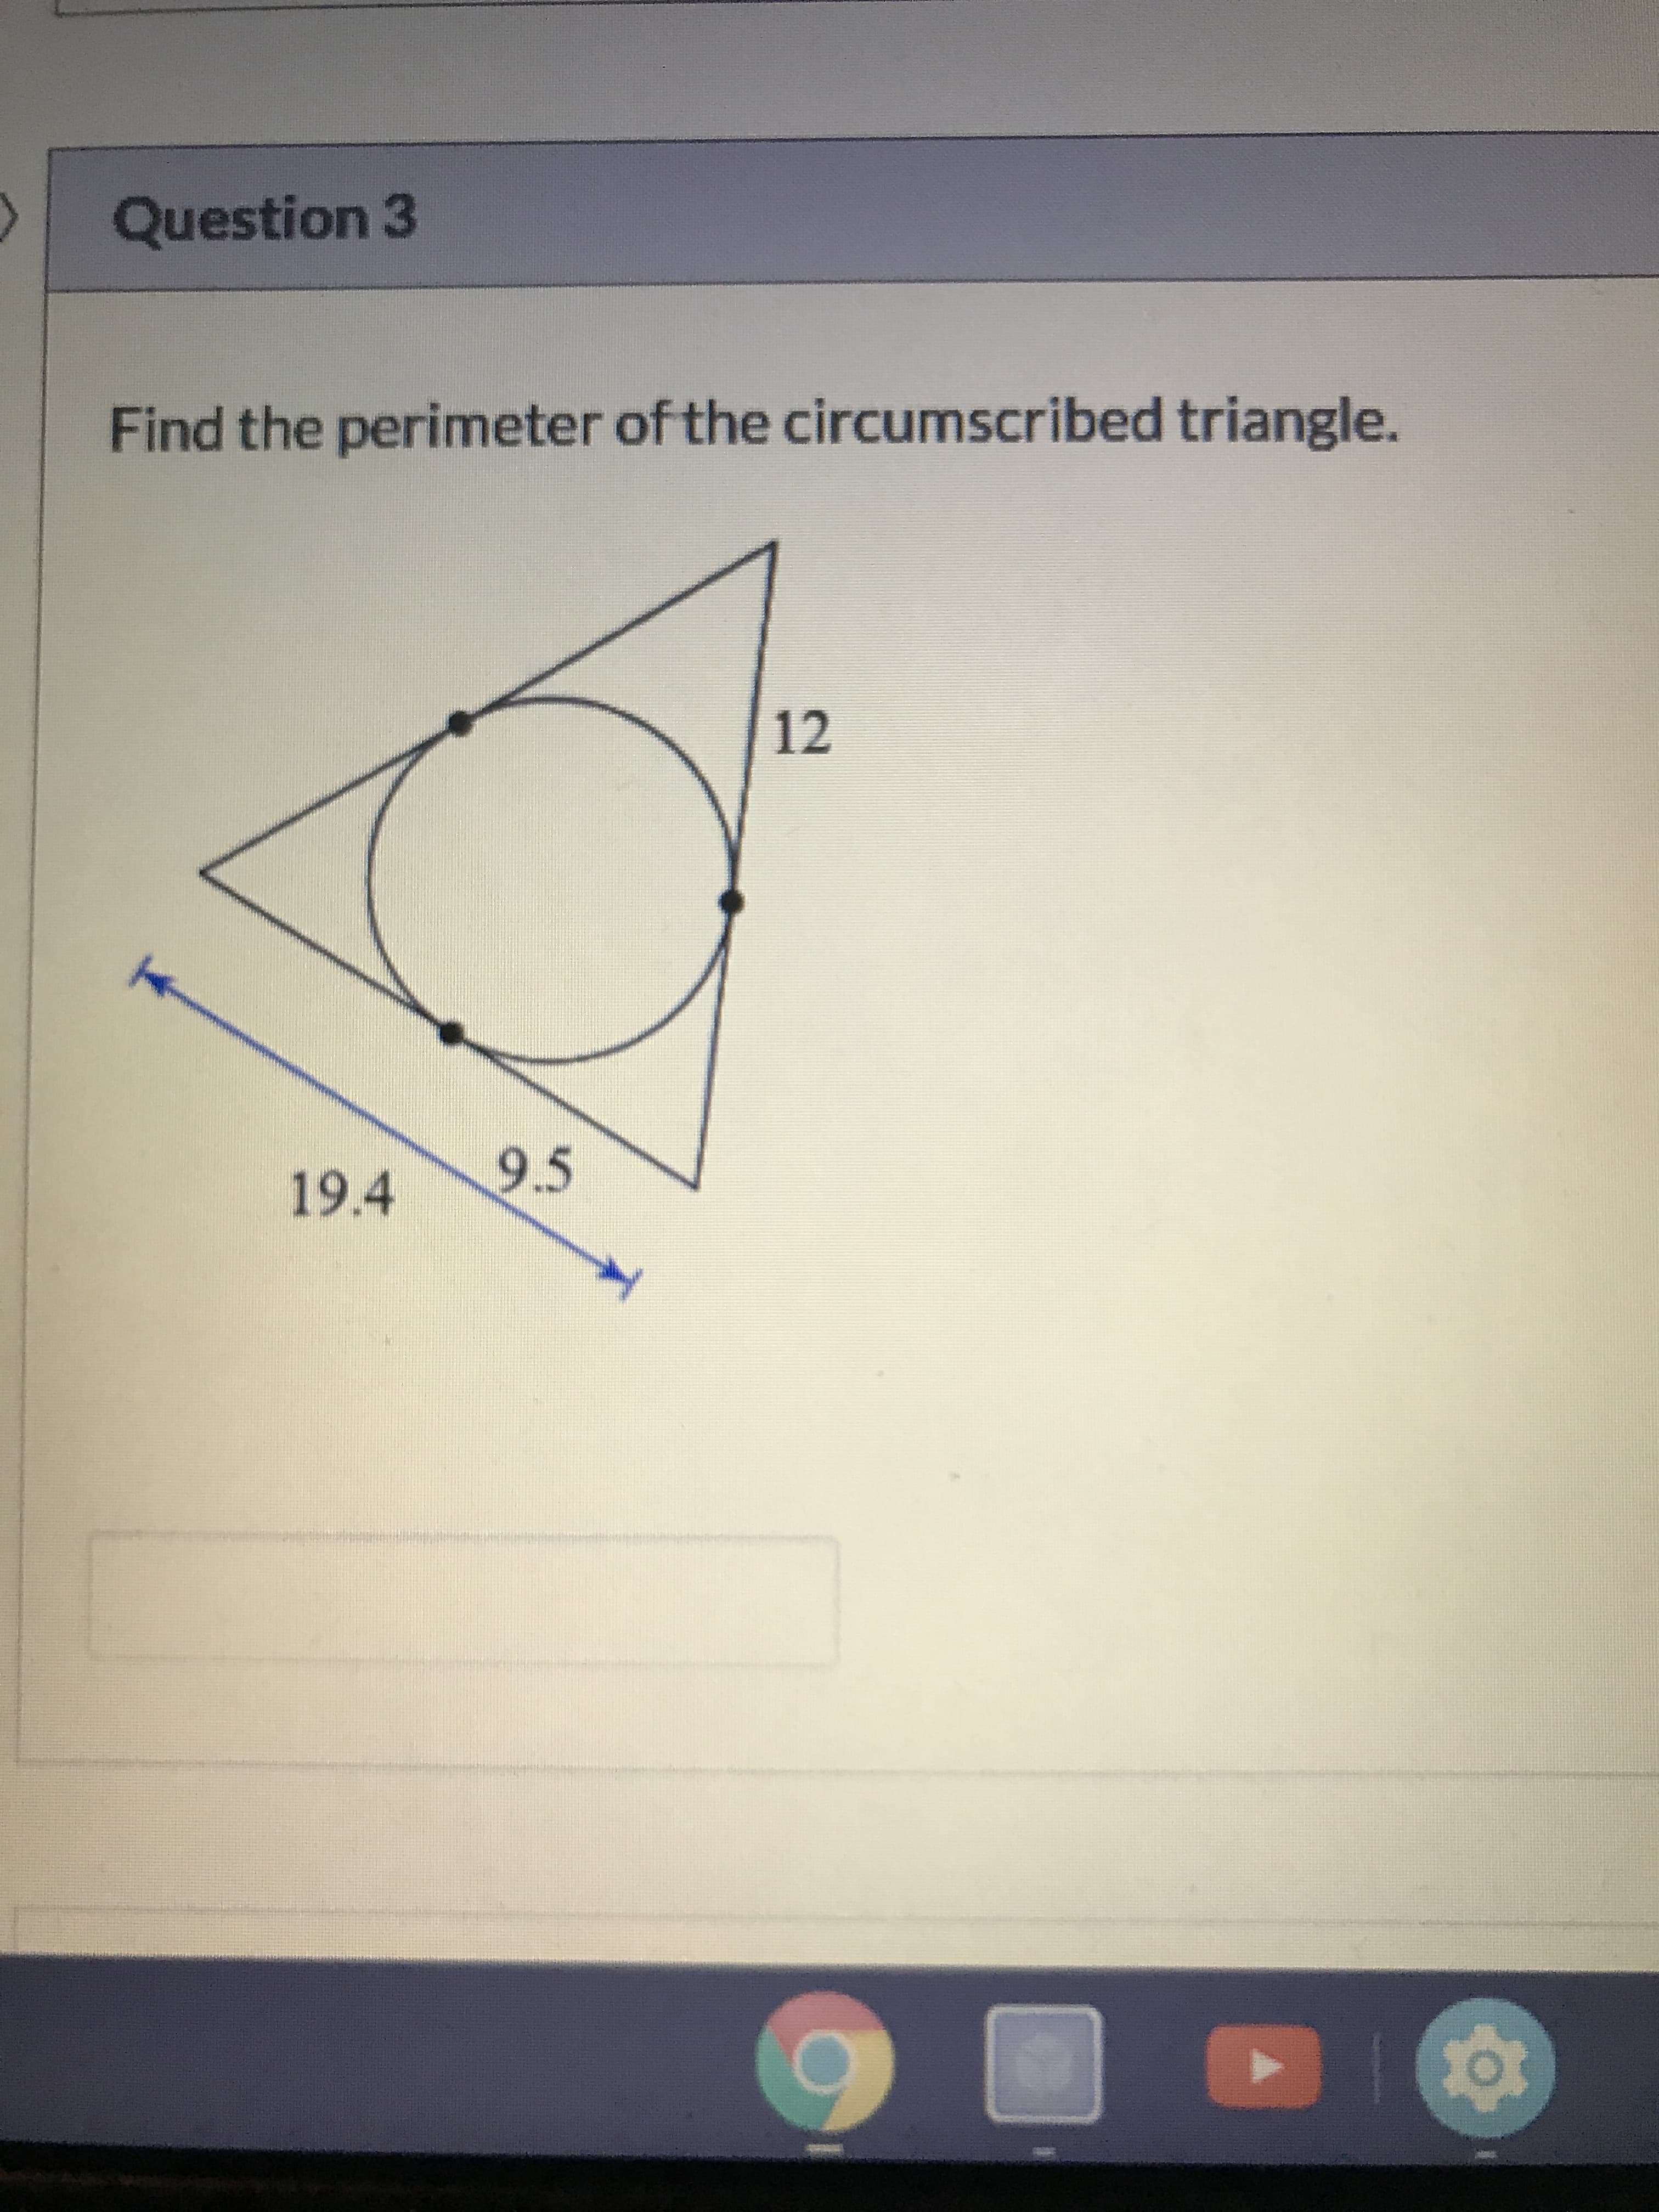 Question 3
Find the perimeter of the circumscribed triangle.
12
19.4
9.5
